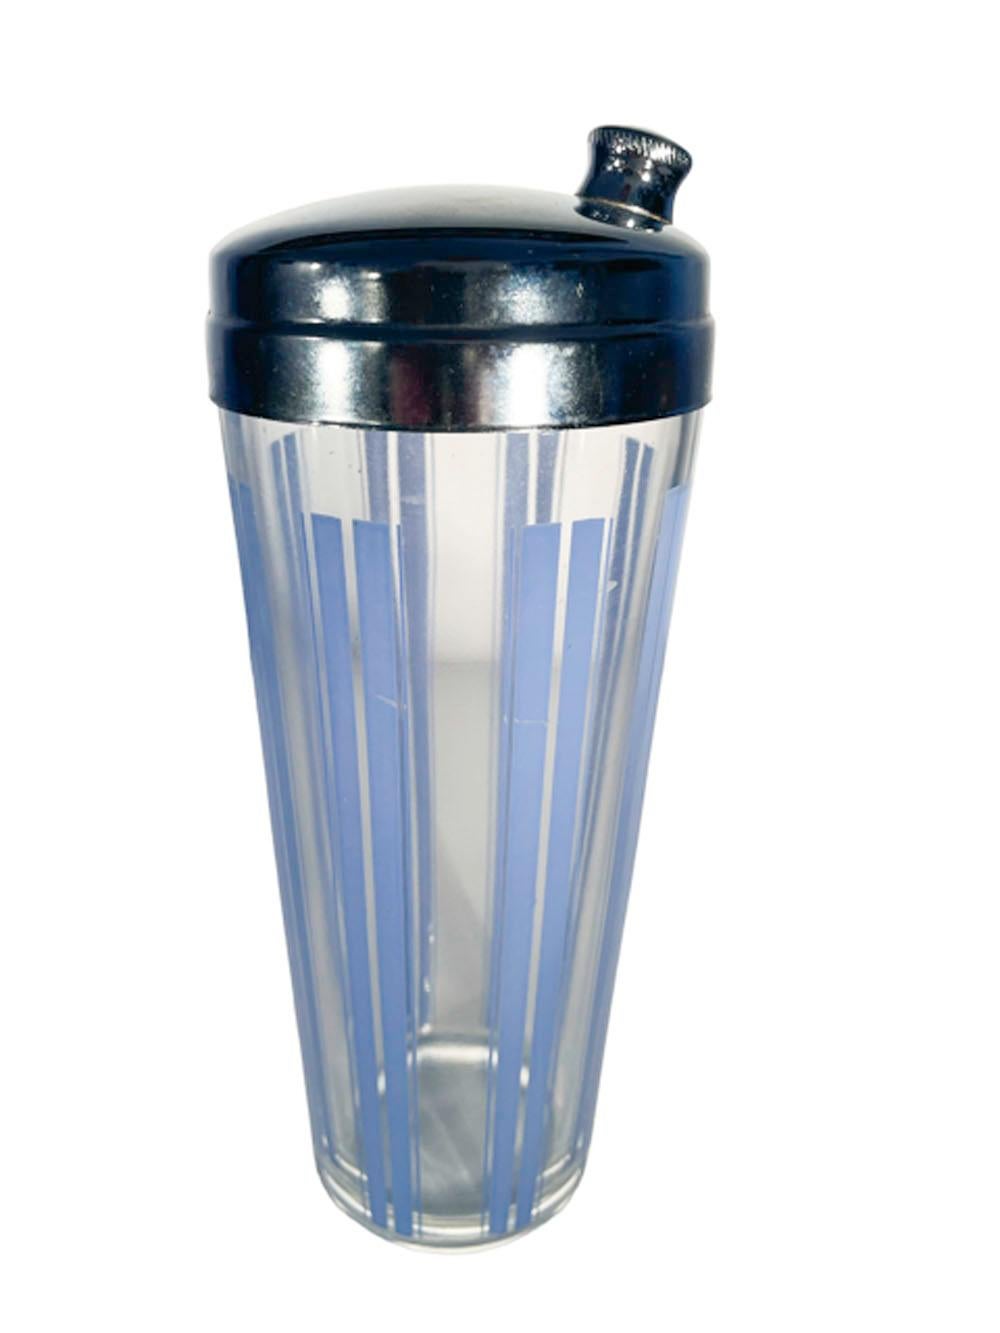 Art Deco cocktail shaker with pairs of wide blue enamel vertical lines between pairs of narrow lines, the Shaker with a chrome lid with off center pour spout.